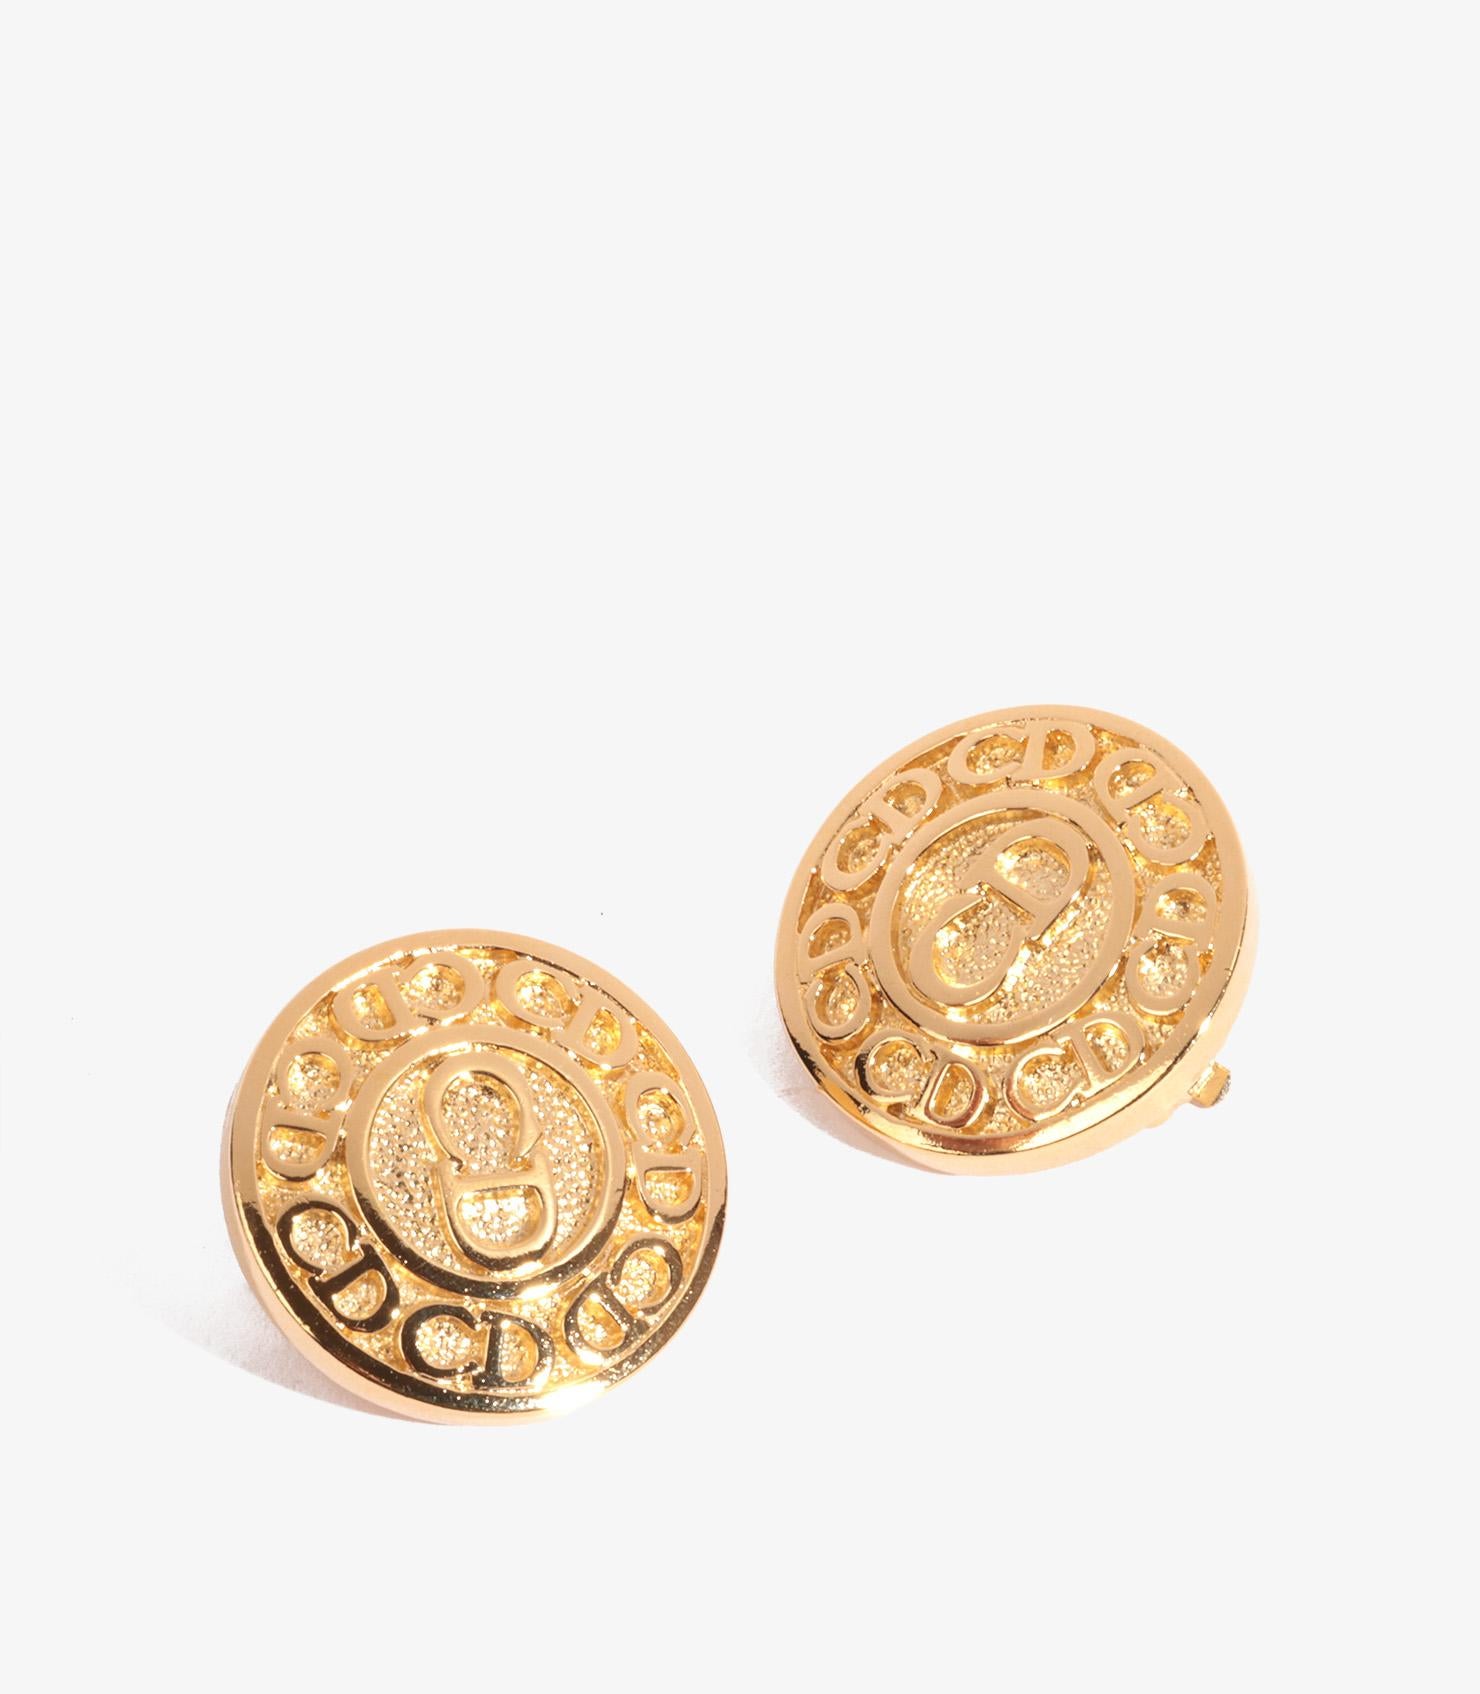 Christian Dior Gold Tone Clip Logo Button Earrings

Brand- Christian Dior
Model- Logo Button Earrings
Product Type- Earrings
Accompanied By- Dior Pouch
Material(s)- Gold Tone Metal

Earring Length- 2.3cm
Earring Width- 2.3cm
Earring Back- Clip